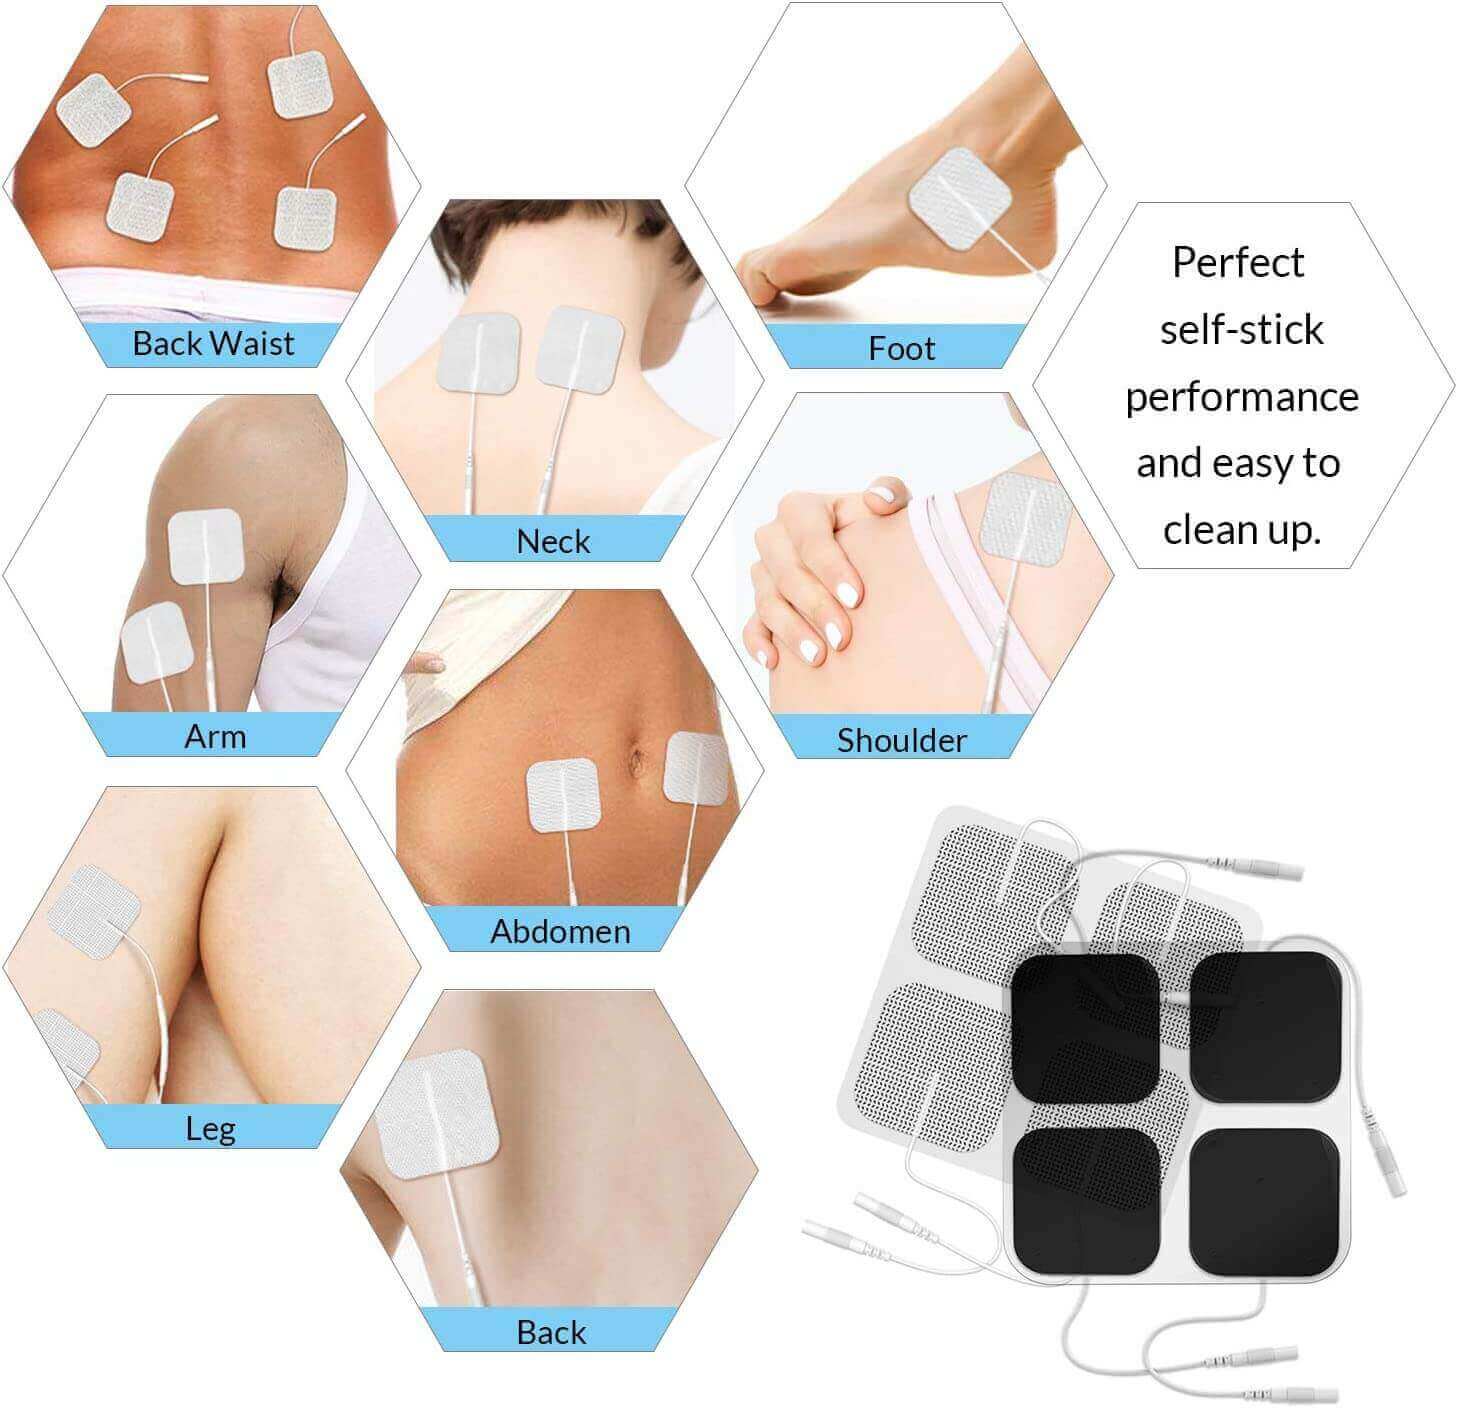 DONECO replacement pads for tens unit - 20 Pcs - 2x2in use of where is feels pain on your body